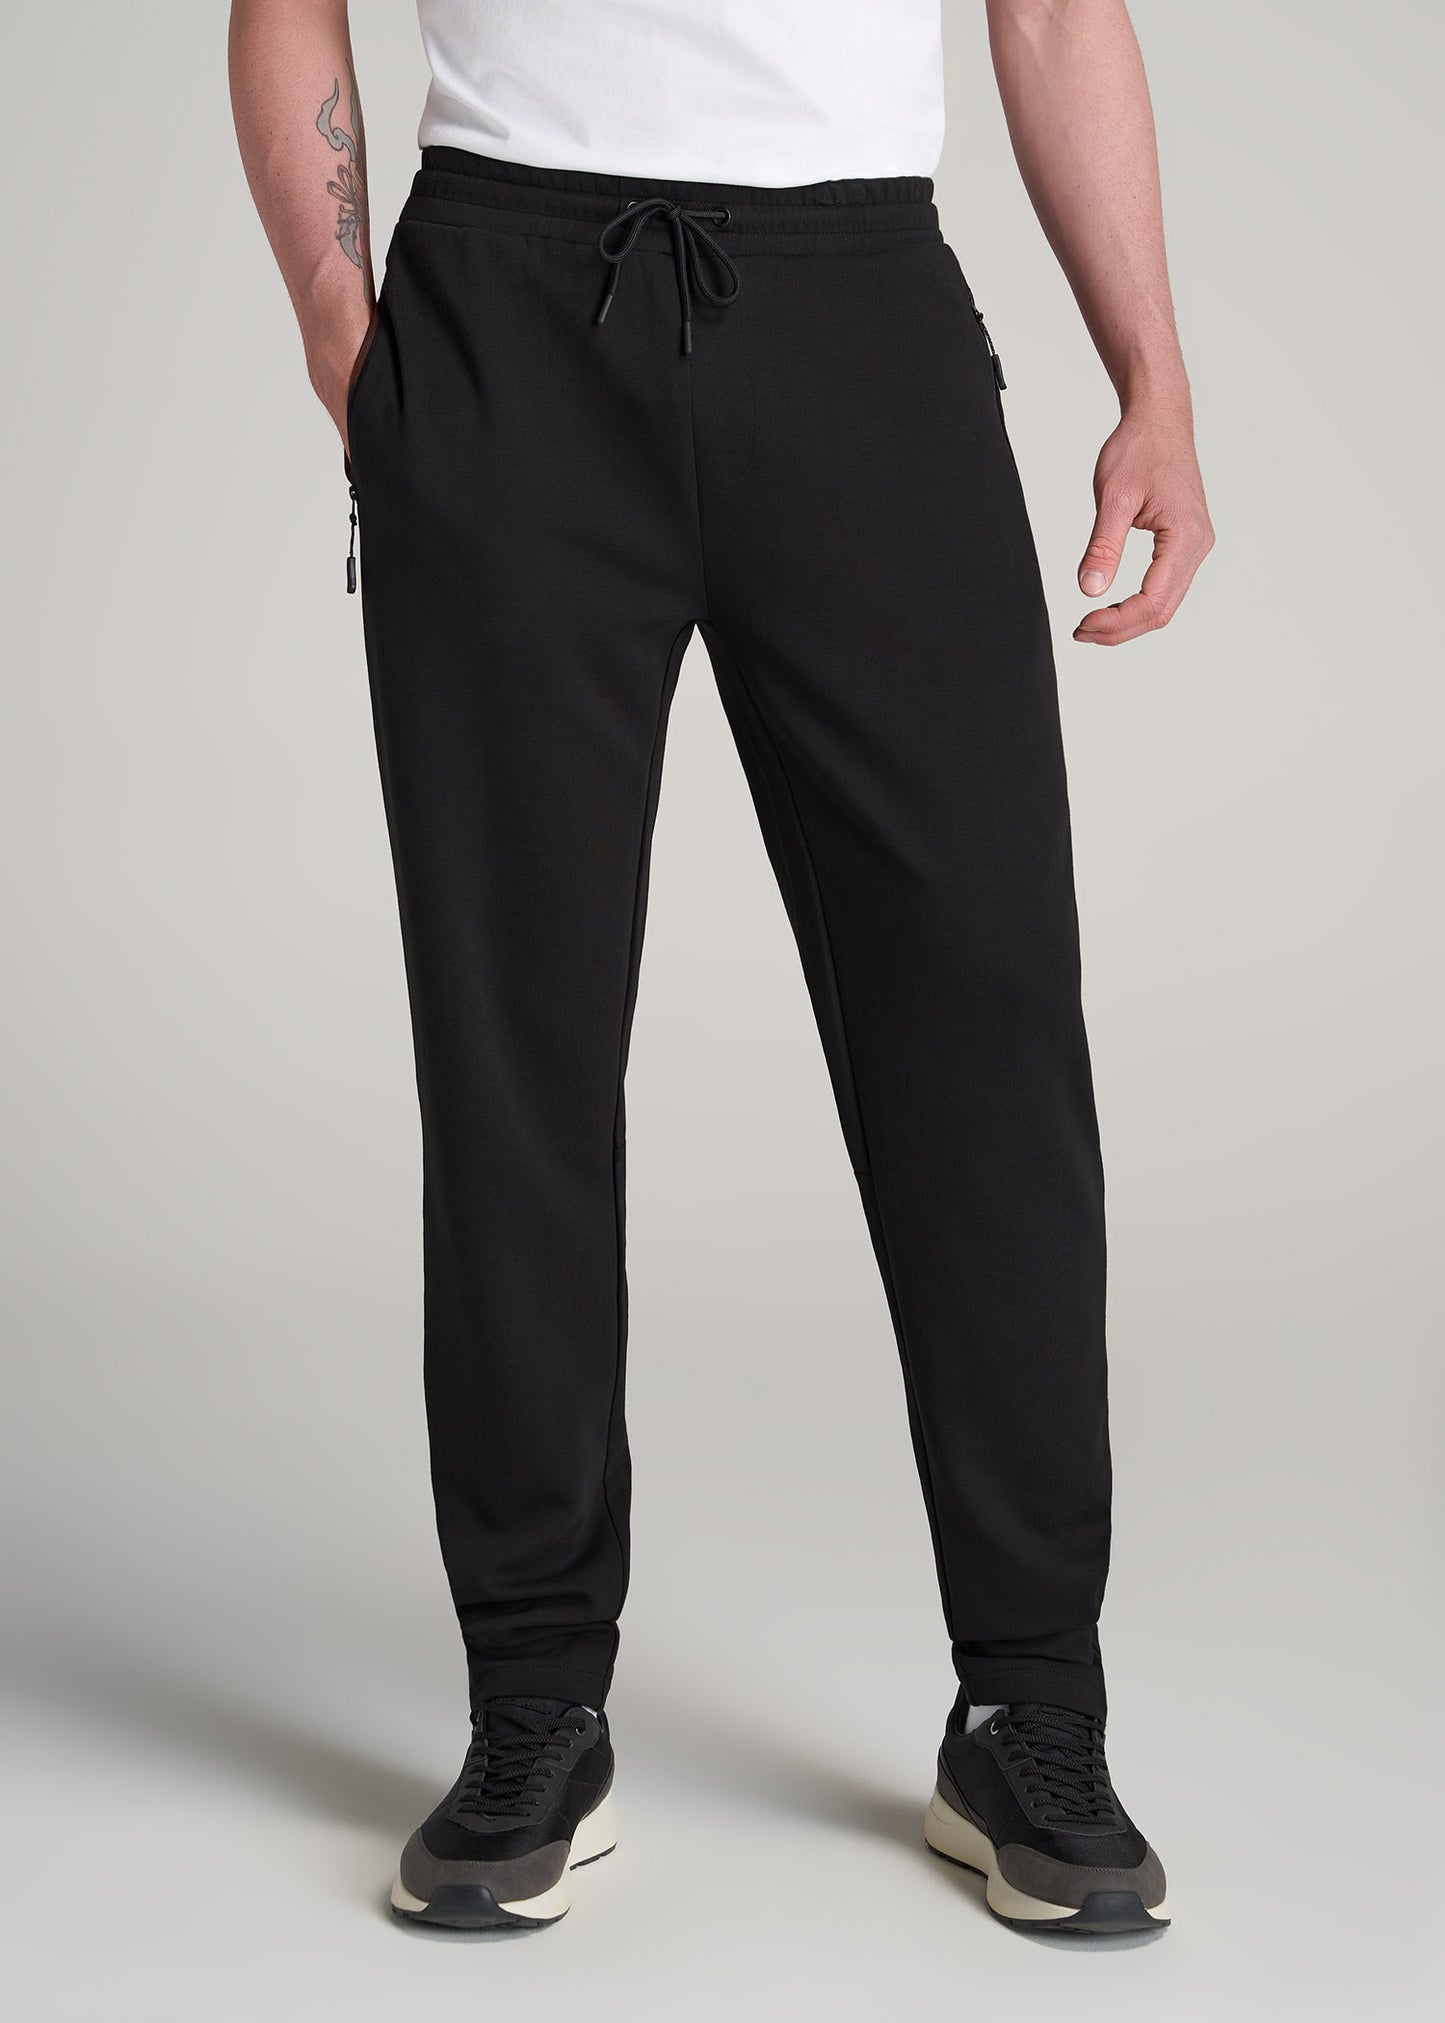    American-Tall-Men-Athleisure-Performance-Pant-Black-front